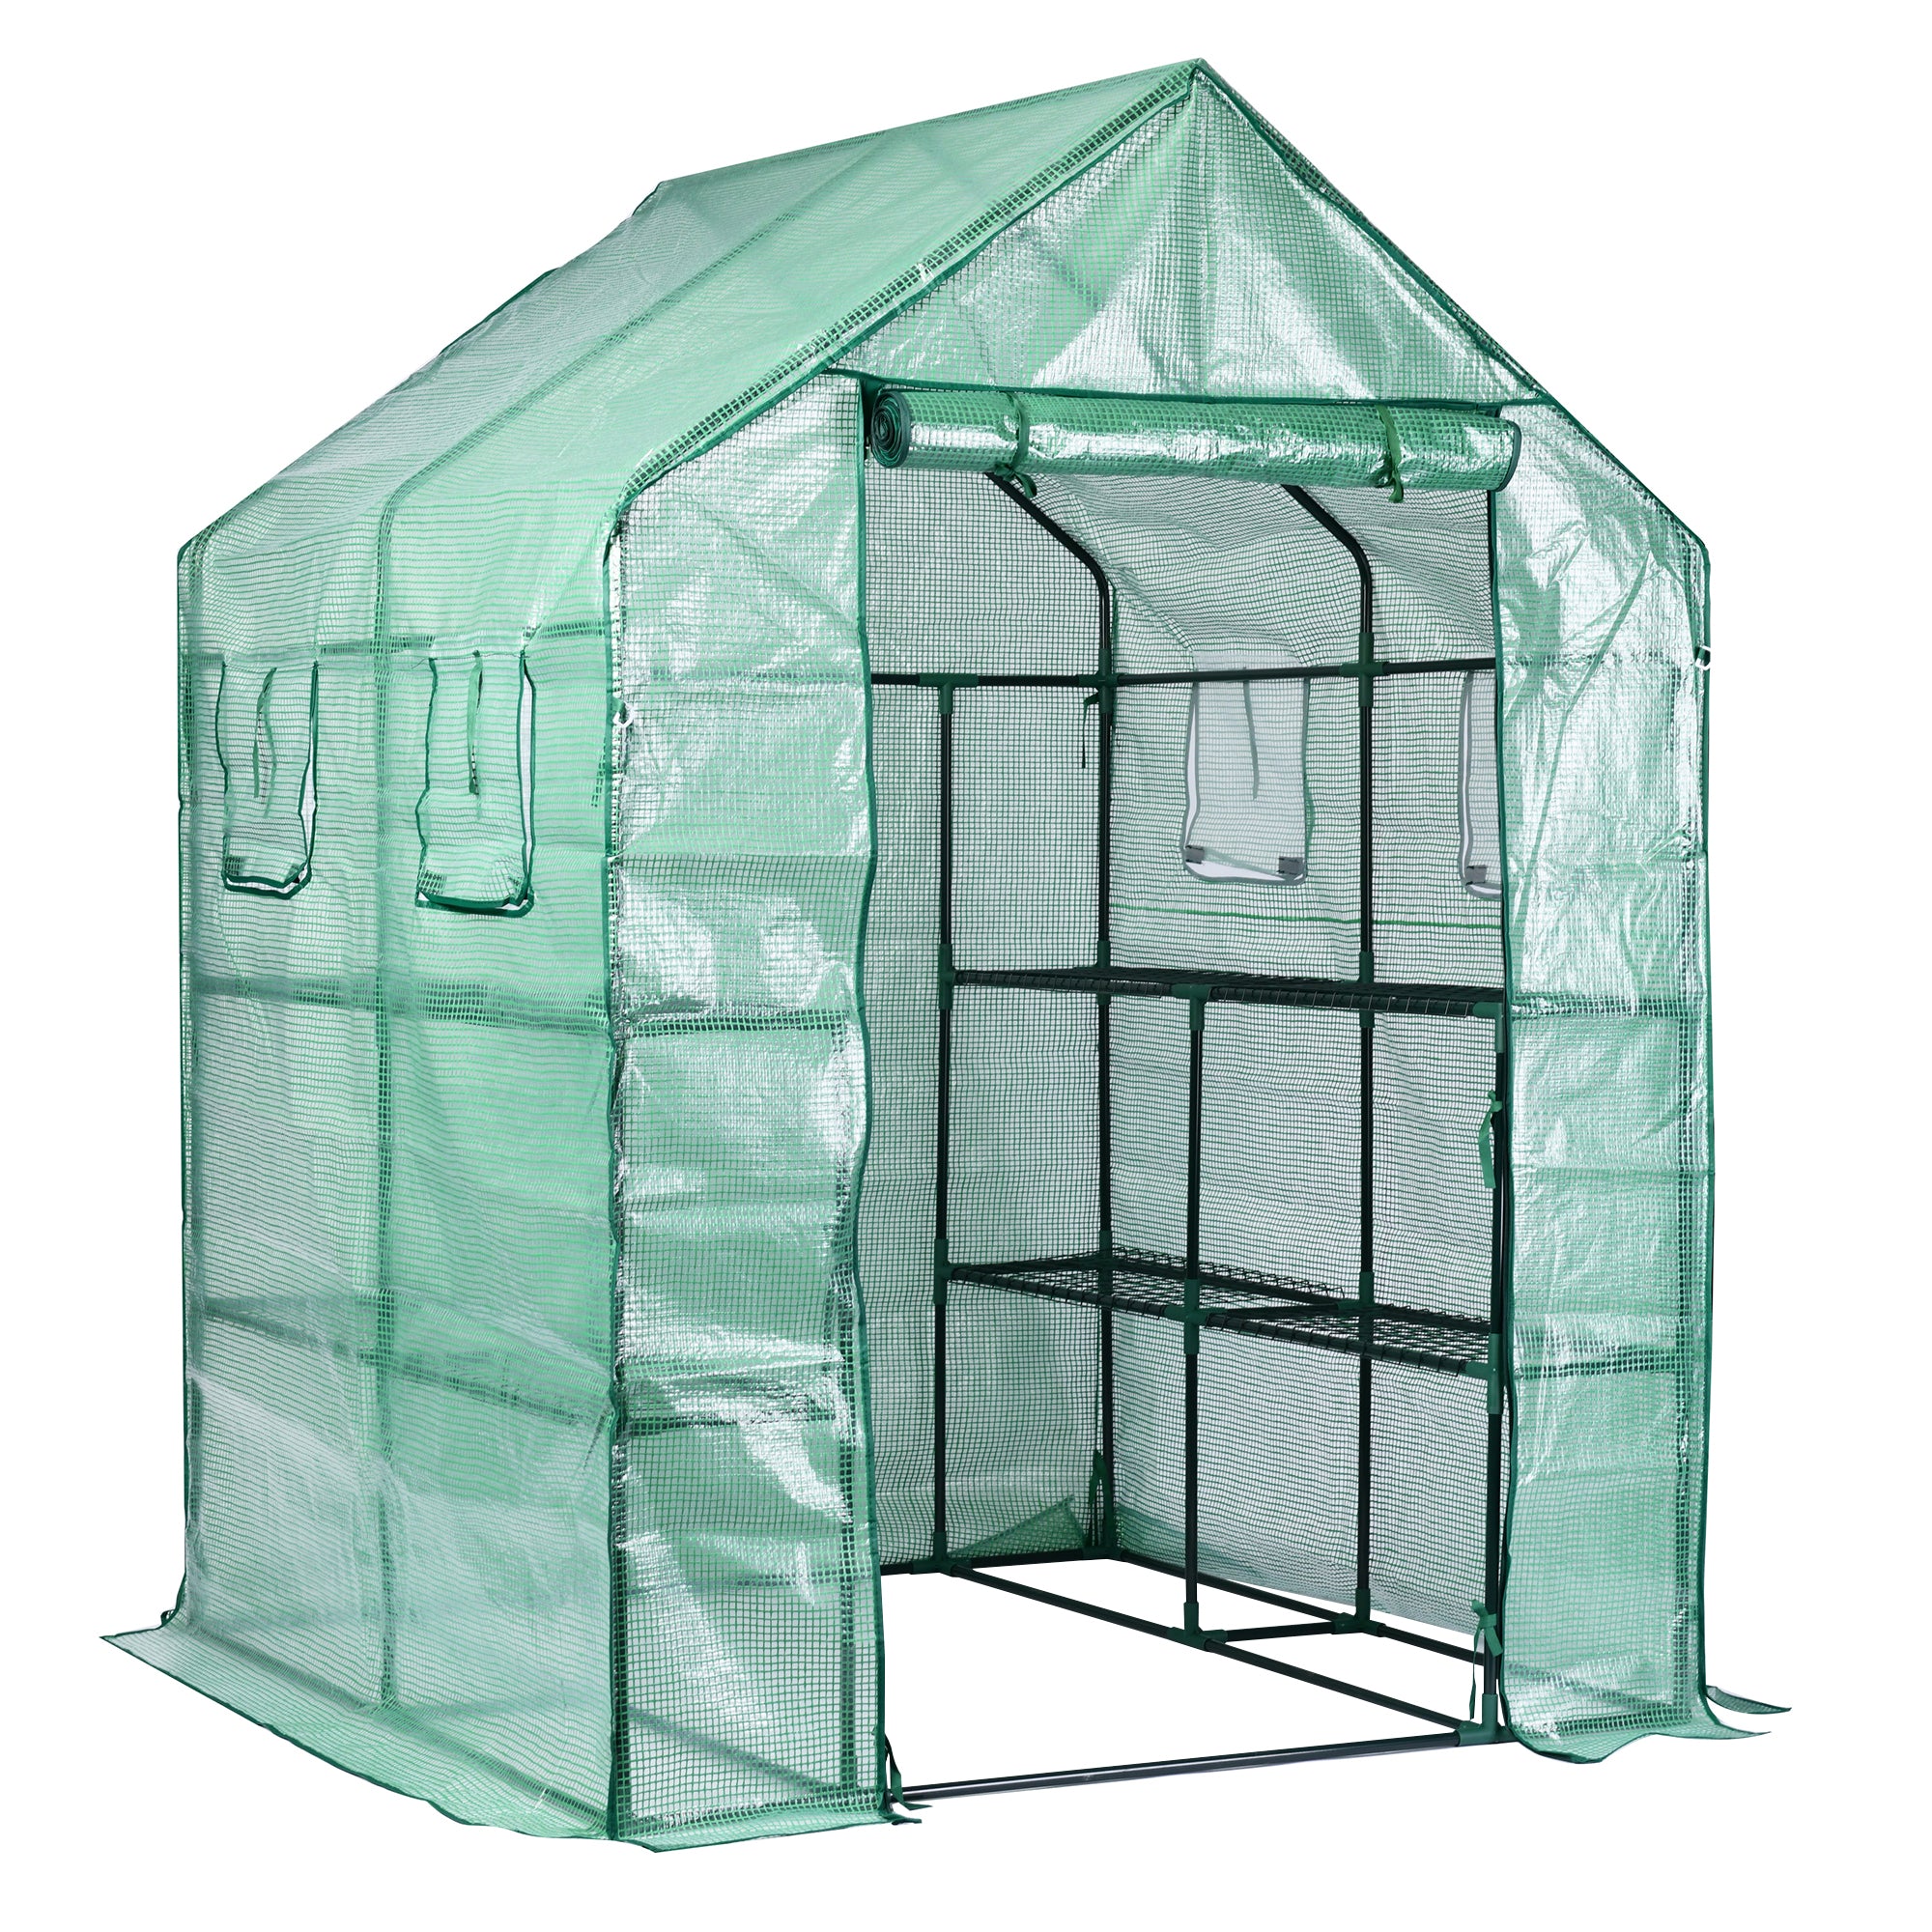 Garden Elements Personal Plastic Indoor/Outdoor Standing Greenhouse For Seed Starting and Propagation, Frost Protection, Green, Large 56" x 56" x 77"